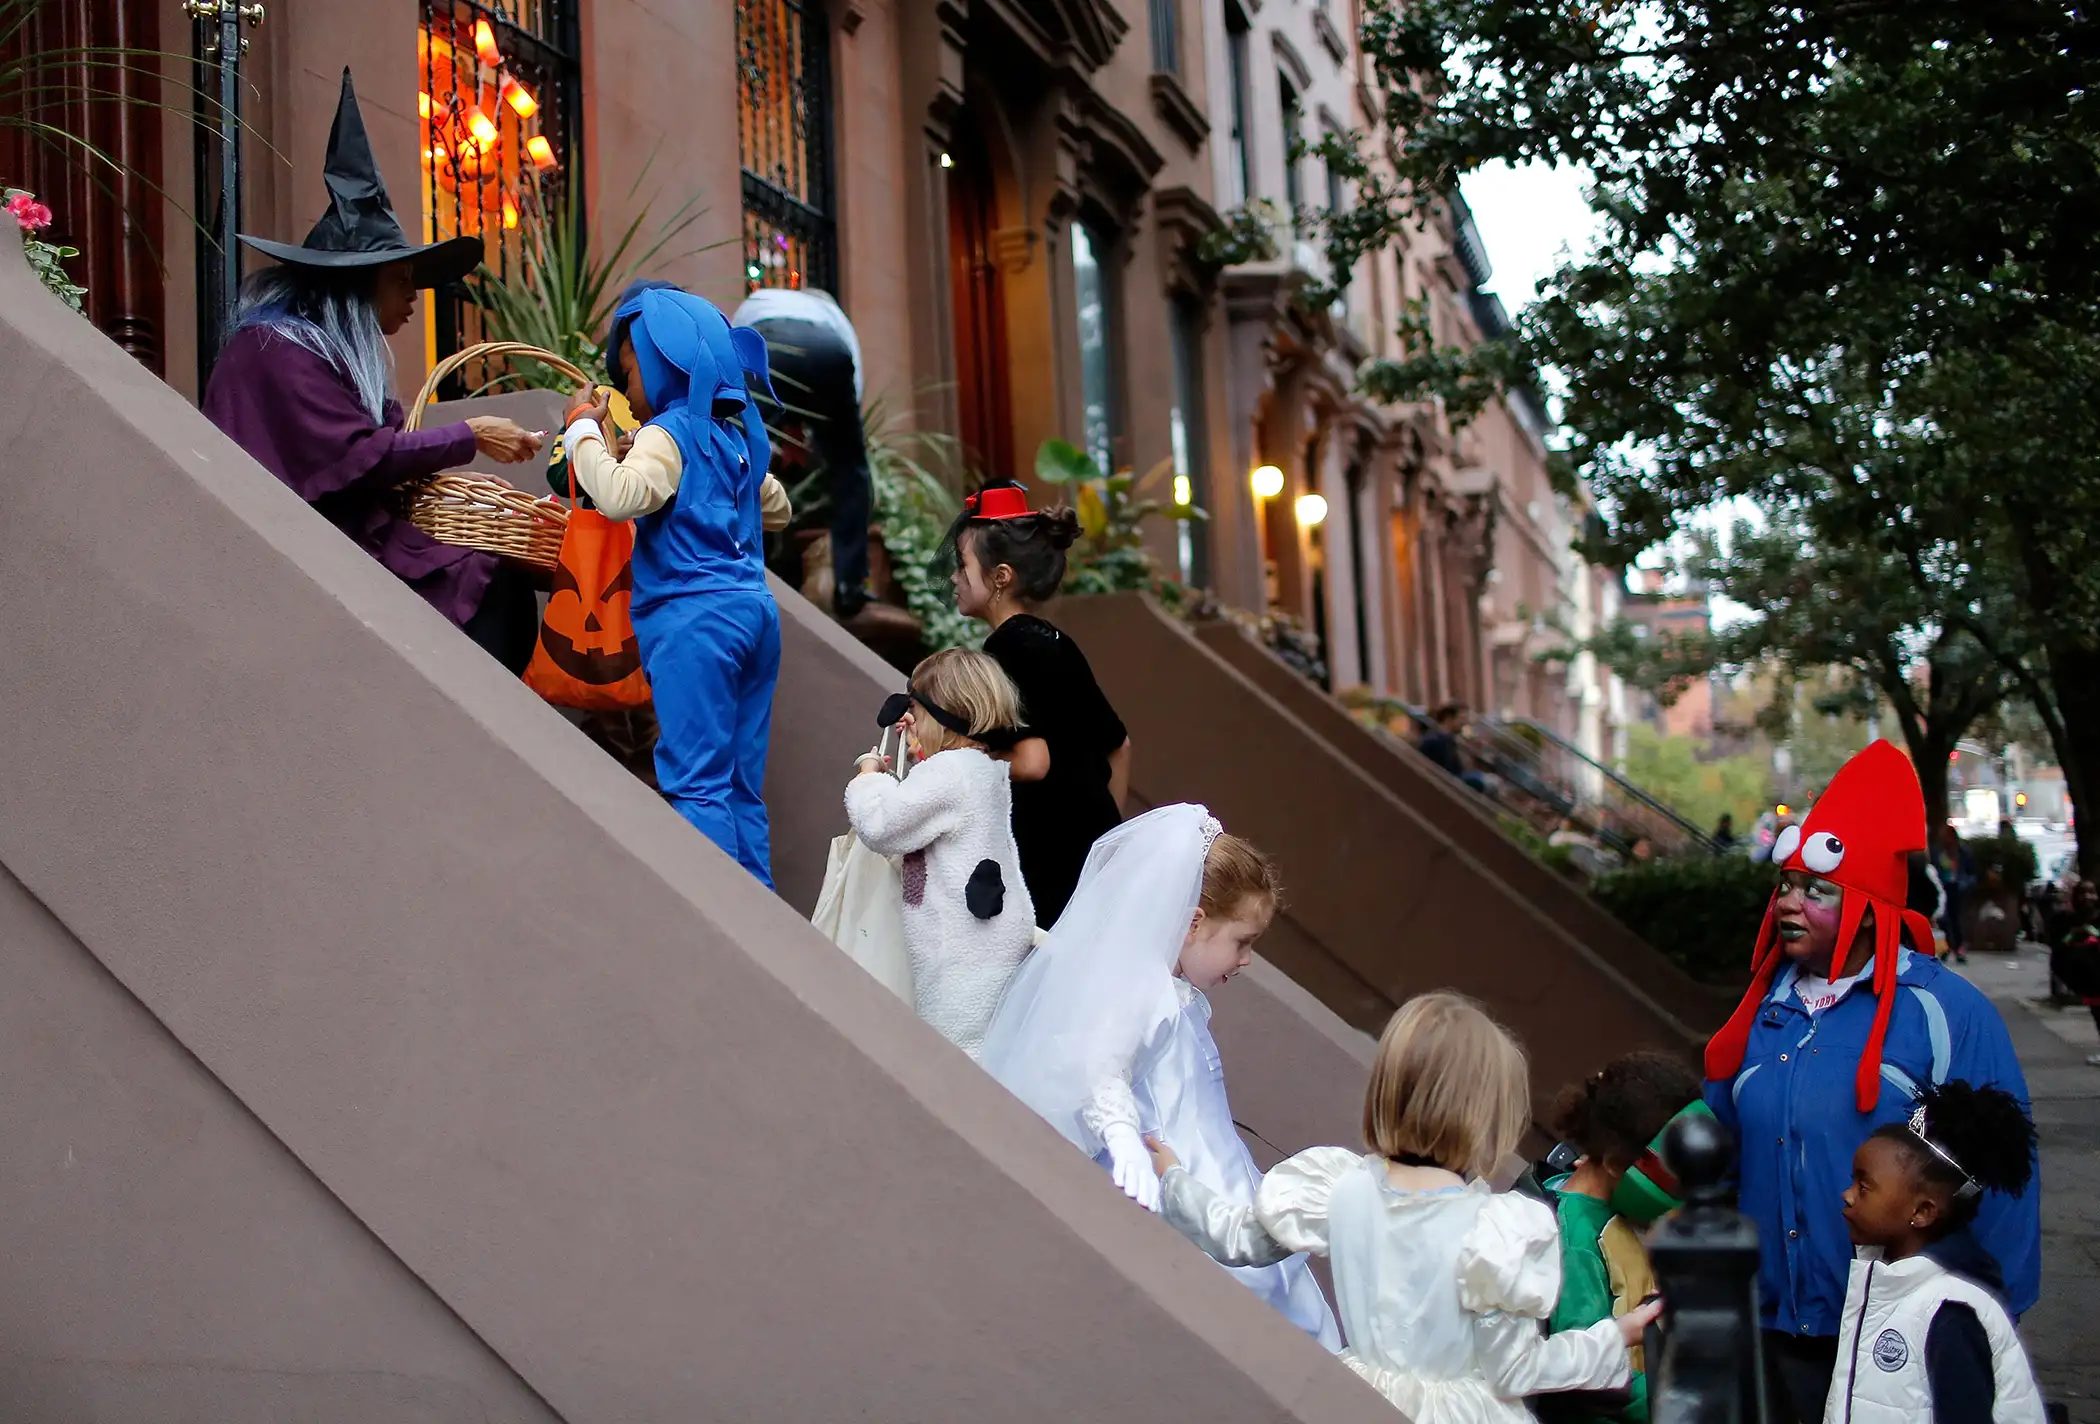 Linda Vital (L) passes out candy to halloween revelers as they stop at a private residence on Greene St. in Clinton Hill, Brooklyn to  Trick or Treat  in Clinton Hill, Brooklyn on October 31, 2013 in New York City.